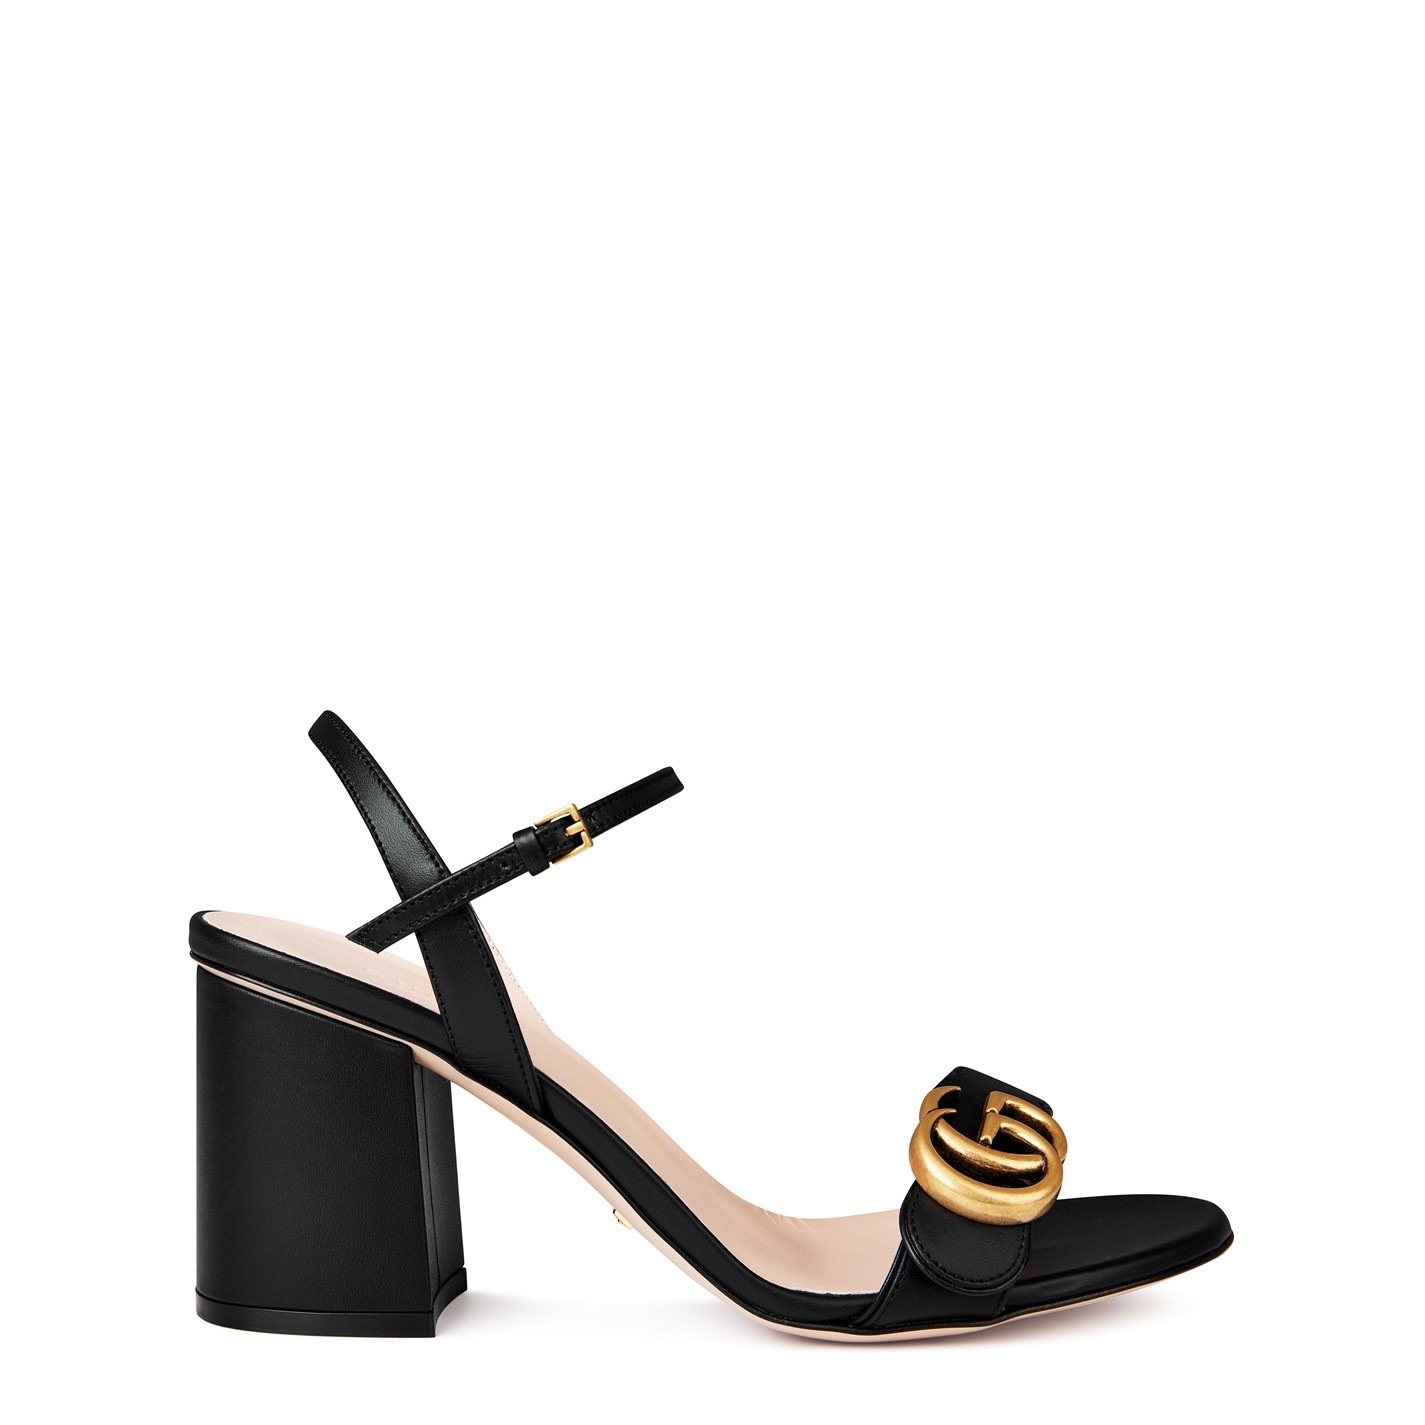 MARMONT GG 70H SANDALS - 7